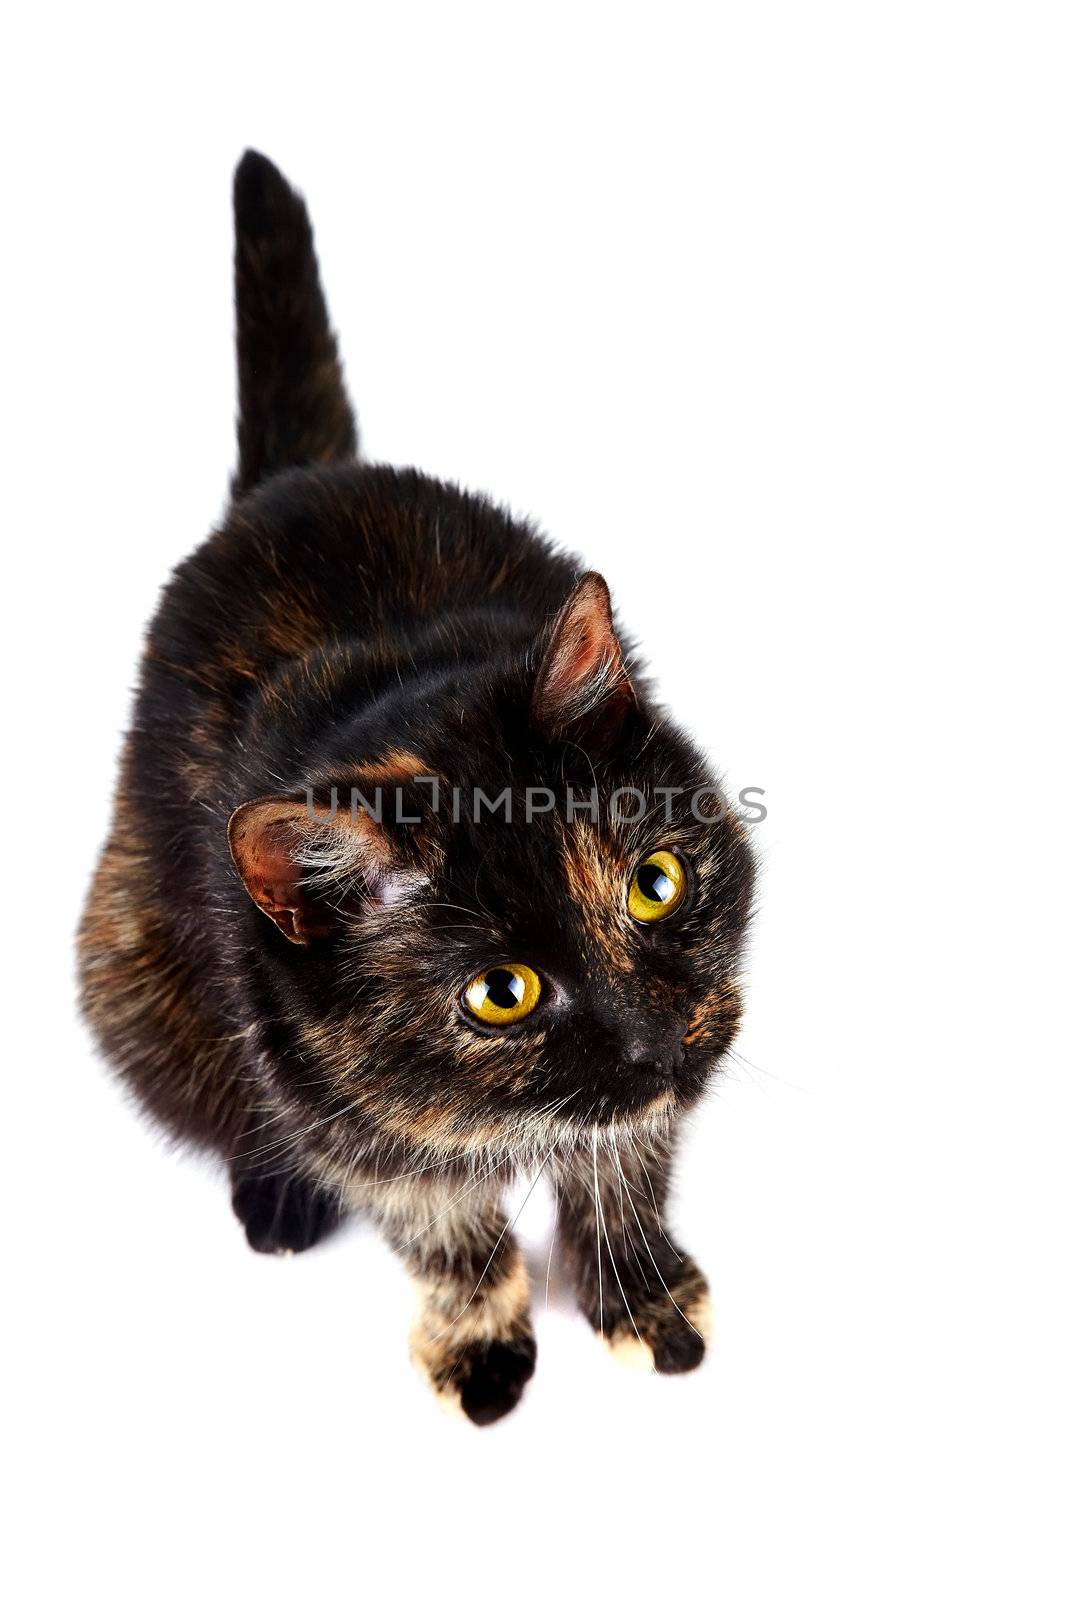 The cat sits on a white background